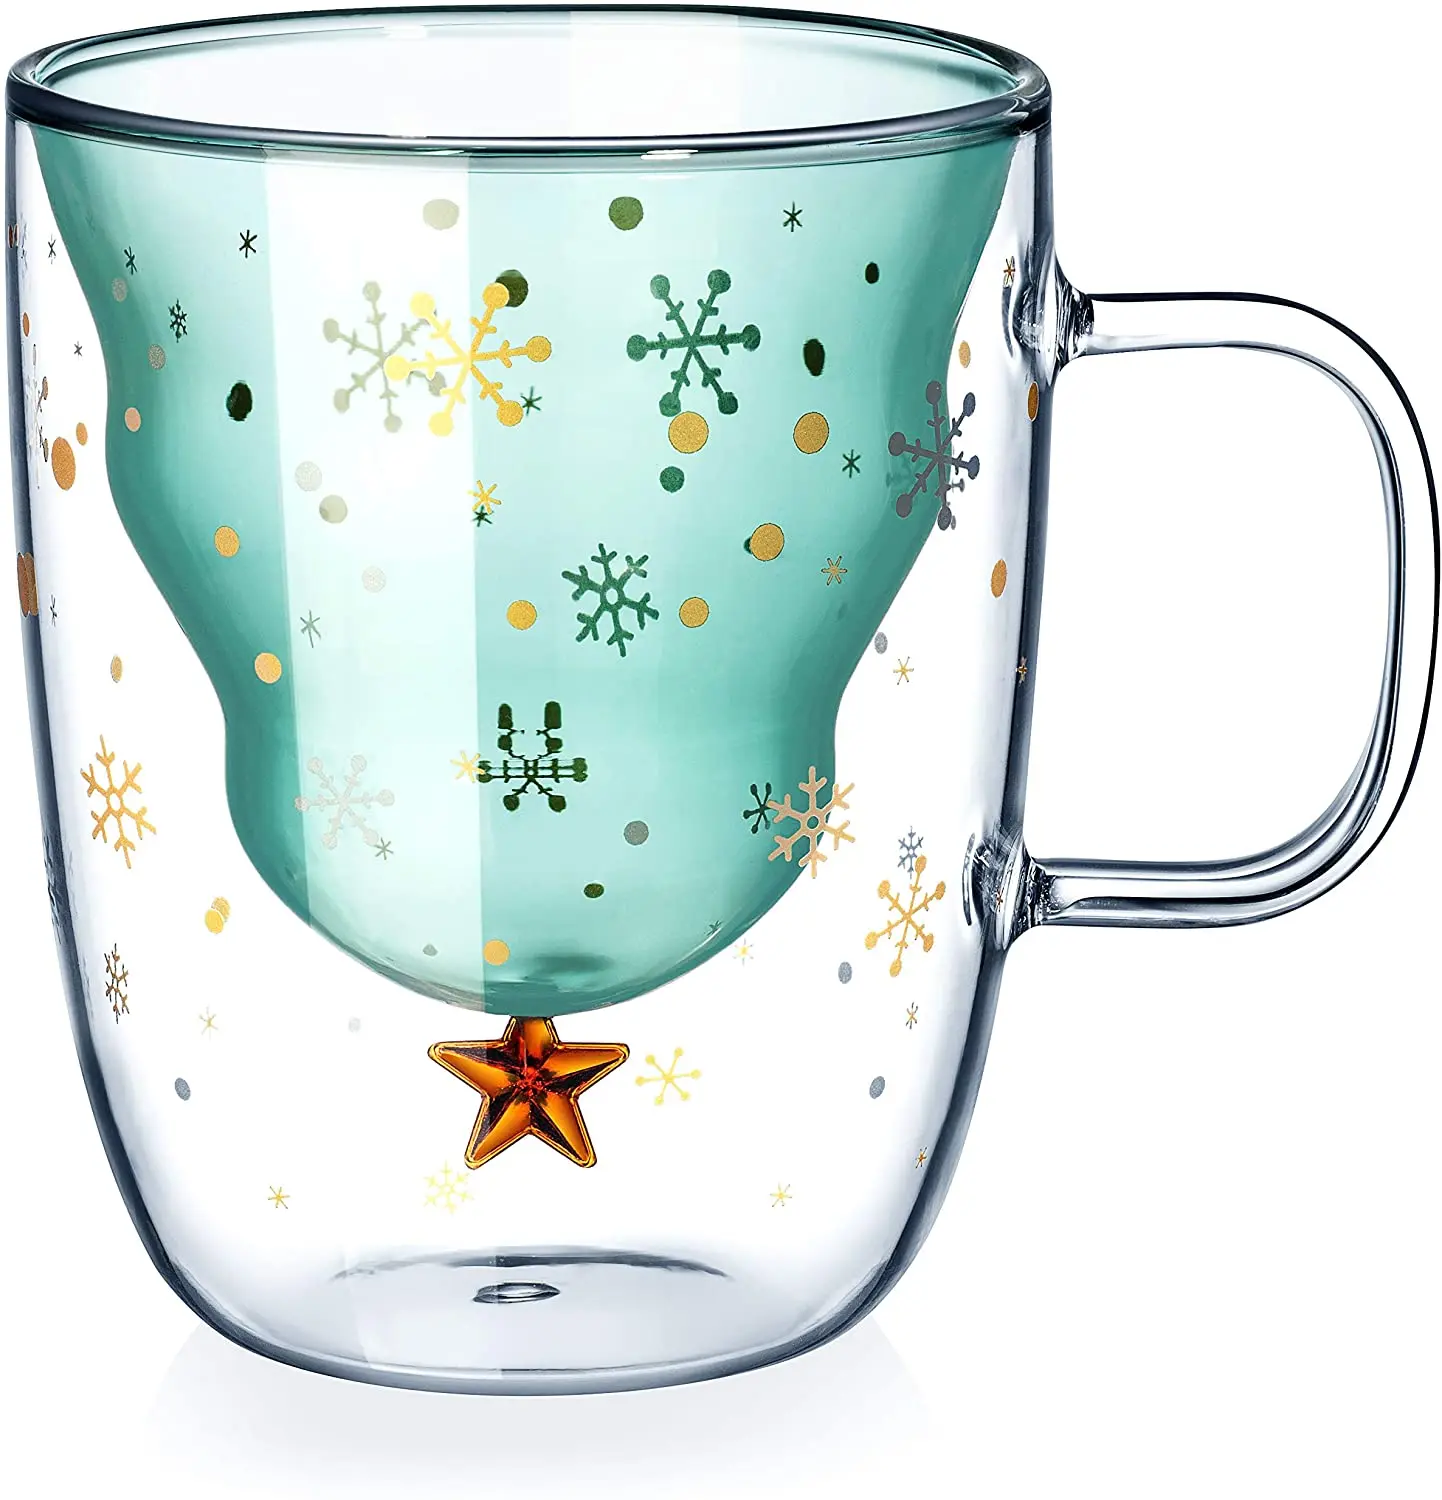 

2021 Double Wall Glass Christmas Tree Star Cup Coffee Cup Milk Juice Mug Children's Christmas Gift Creative 3D Anti-Scalding Cup, Blue